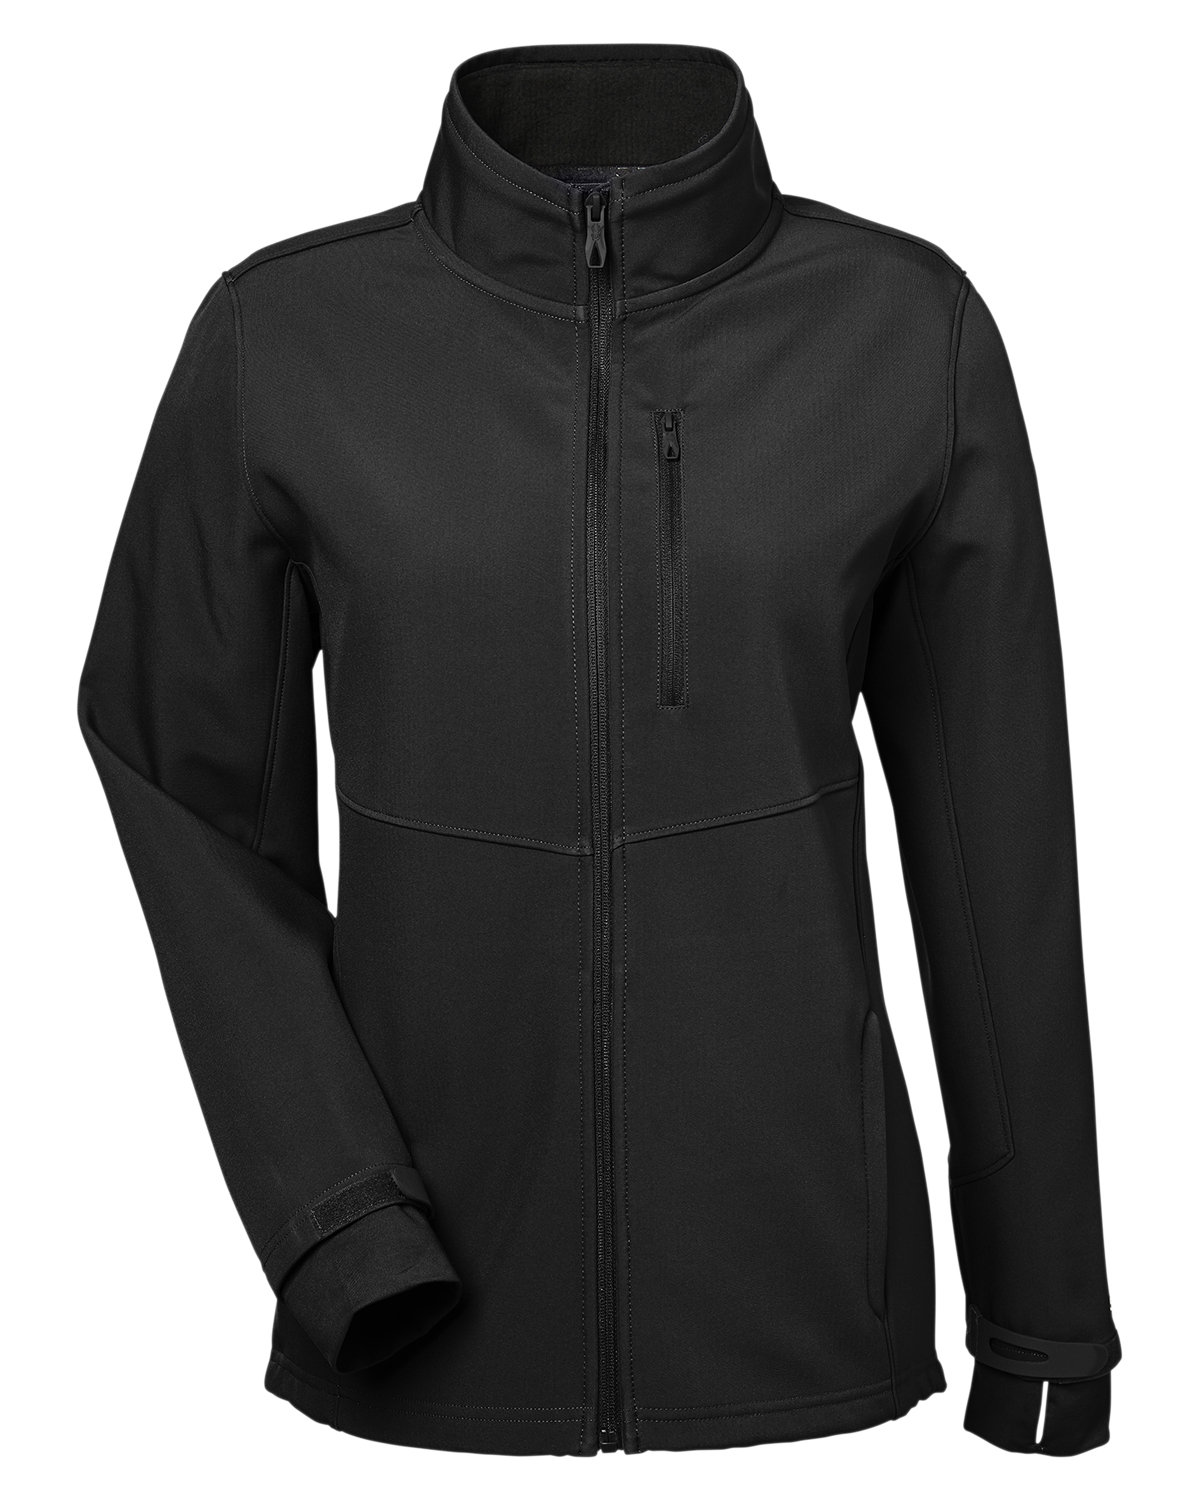 Picture of Spyder Women's Touring Jacket 